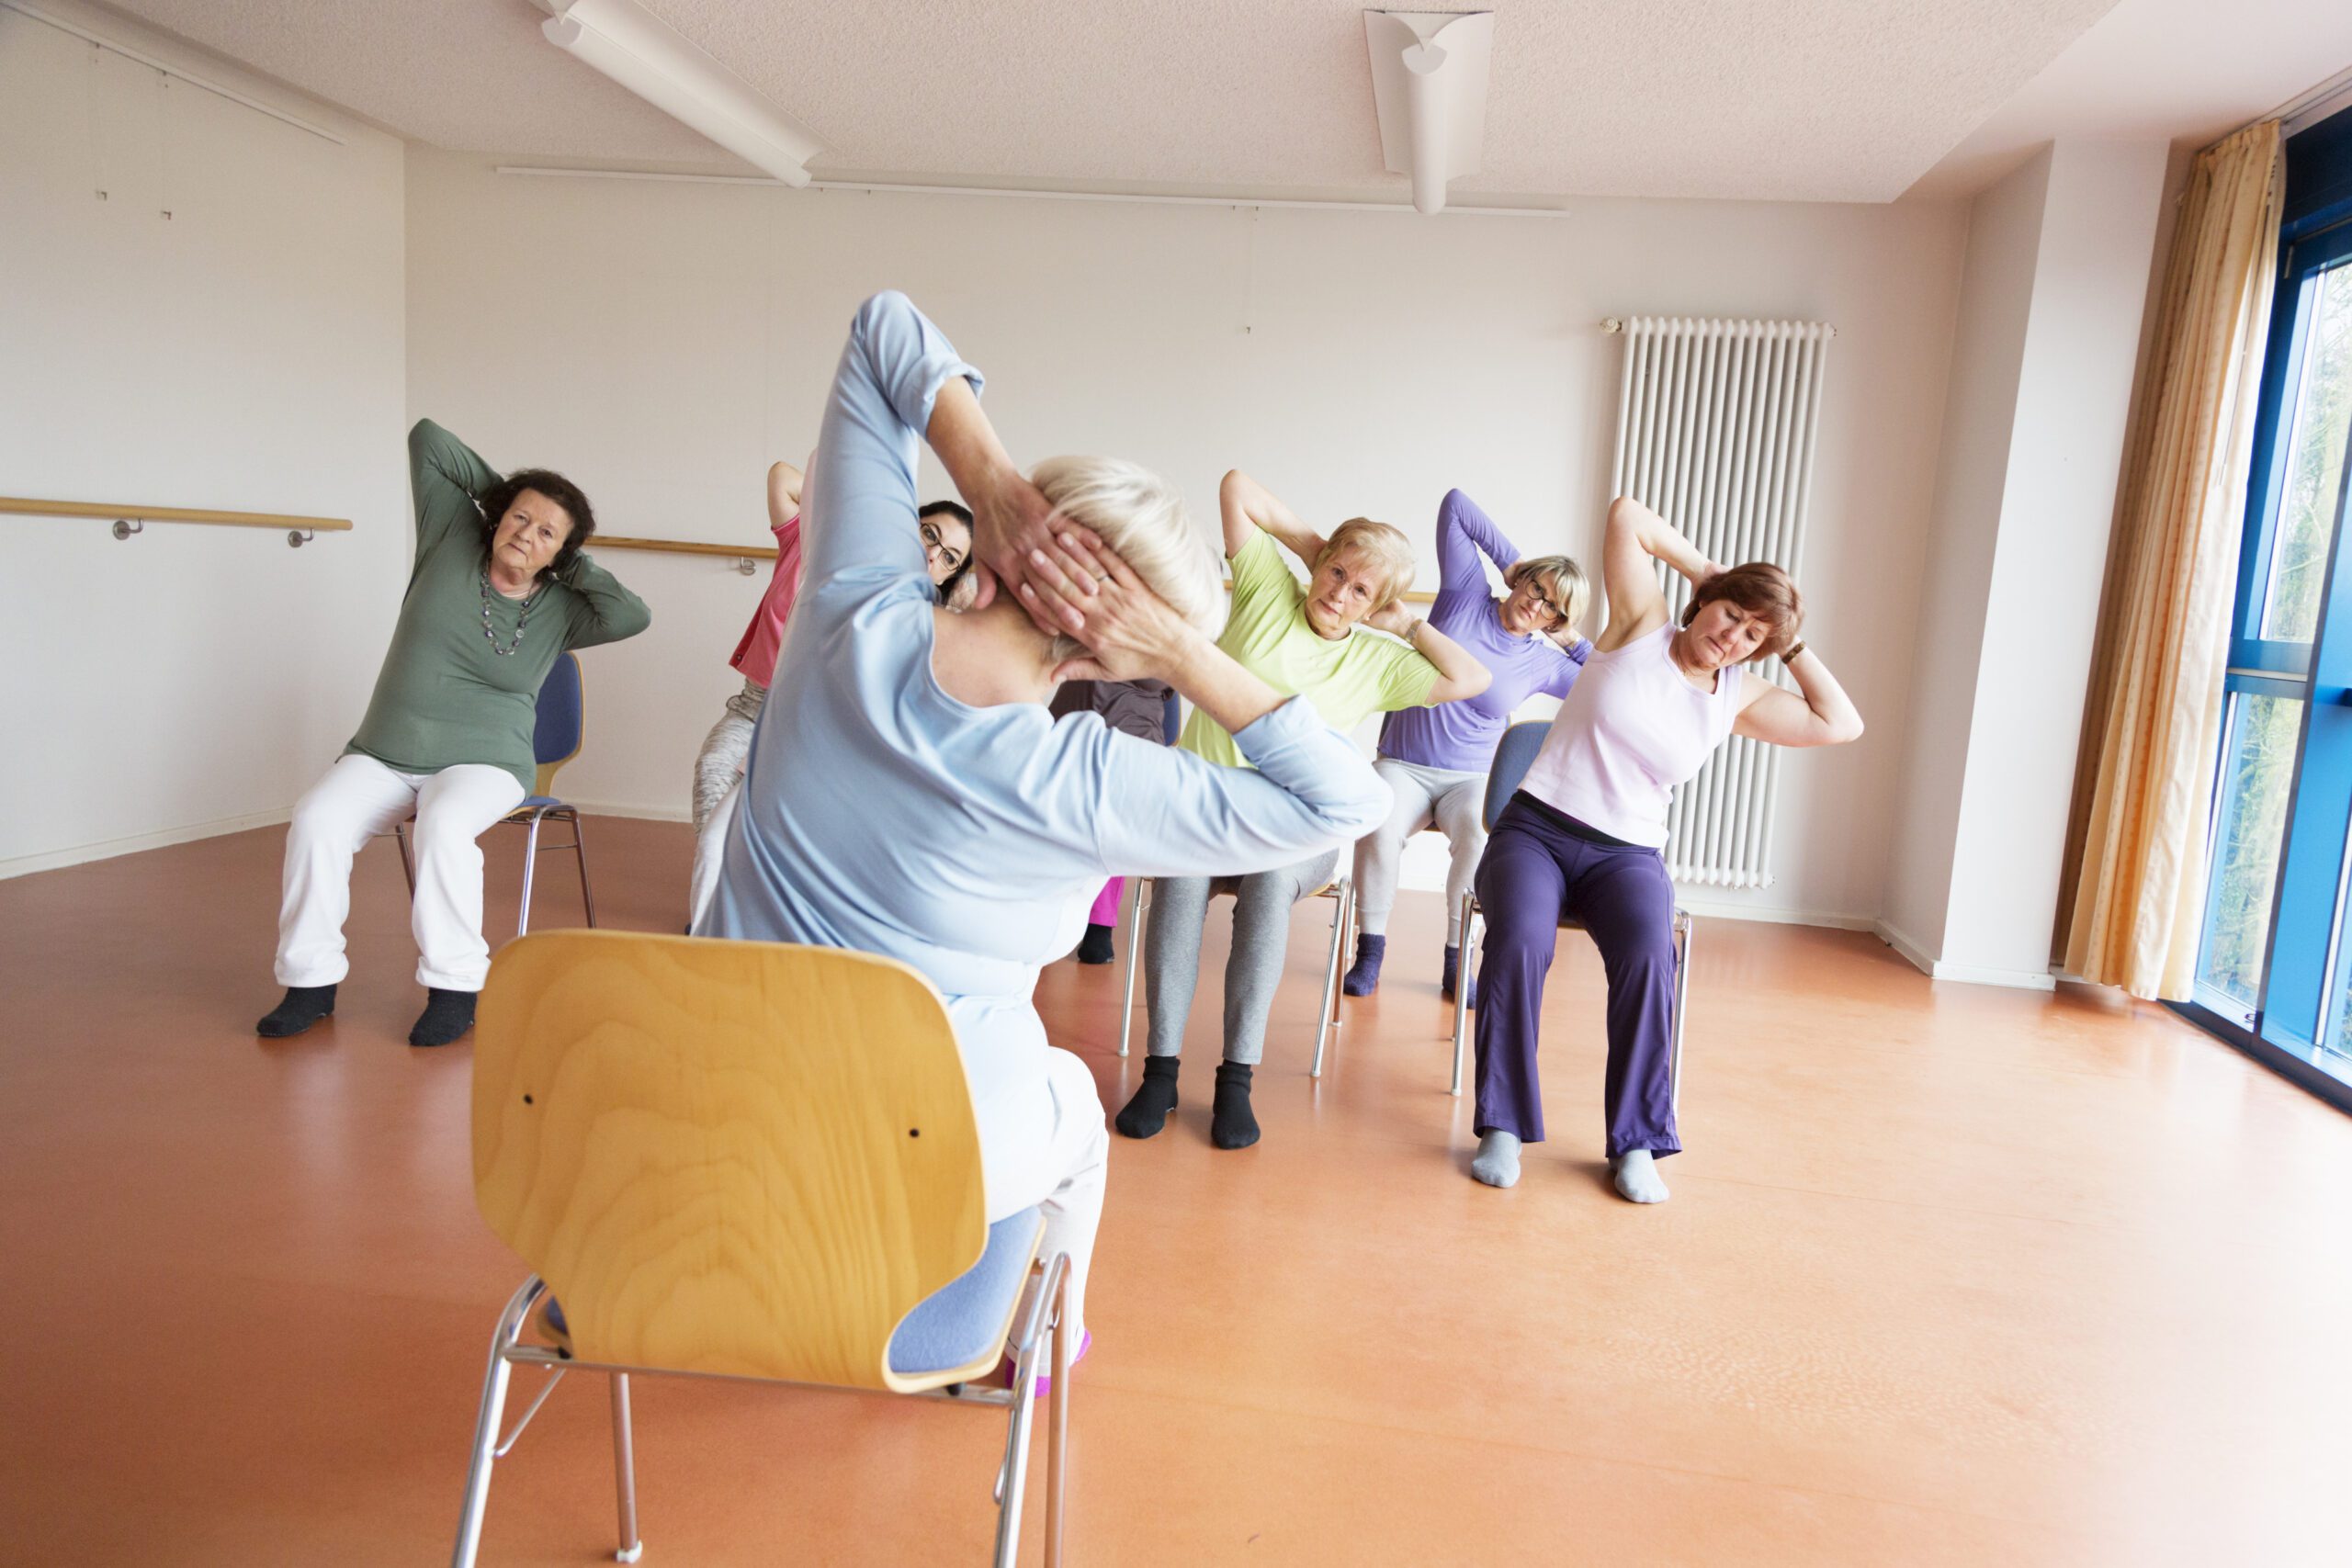 senior women exercising yoga and pilates sitting on chairs, following the instruction of their teacher